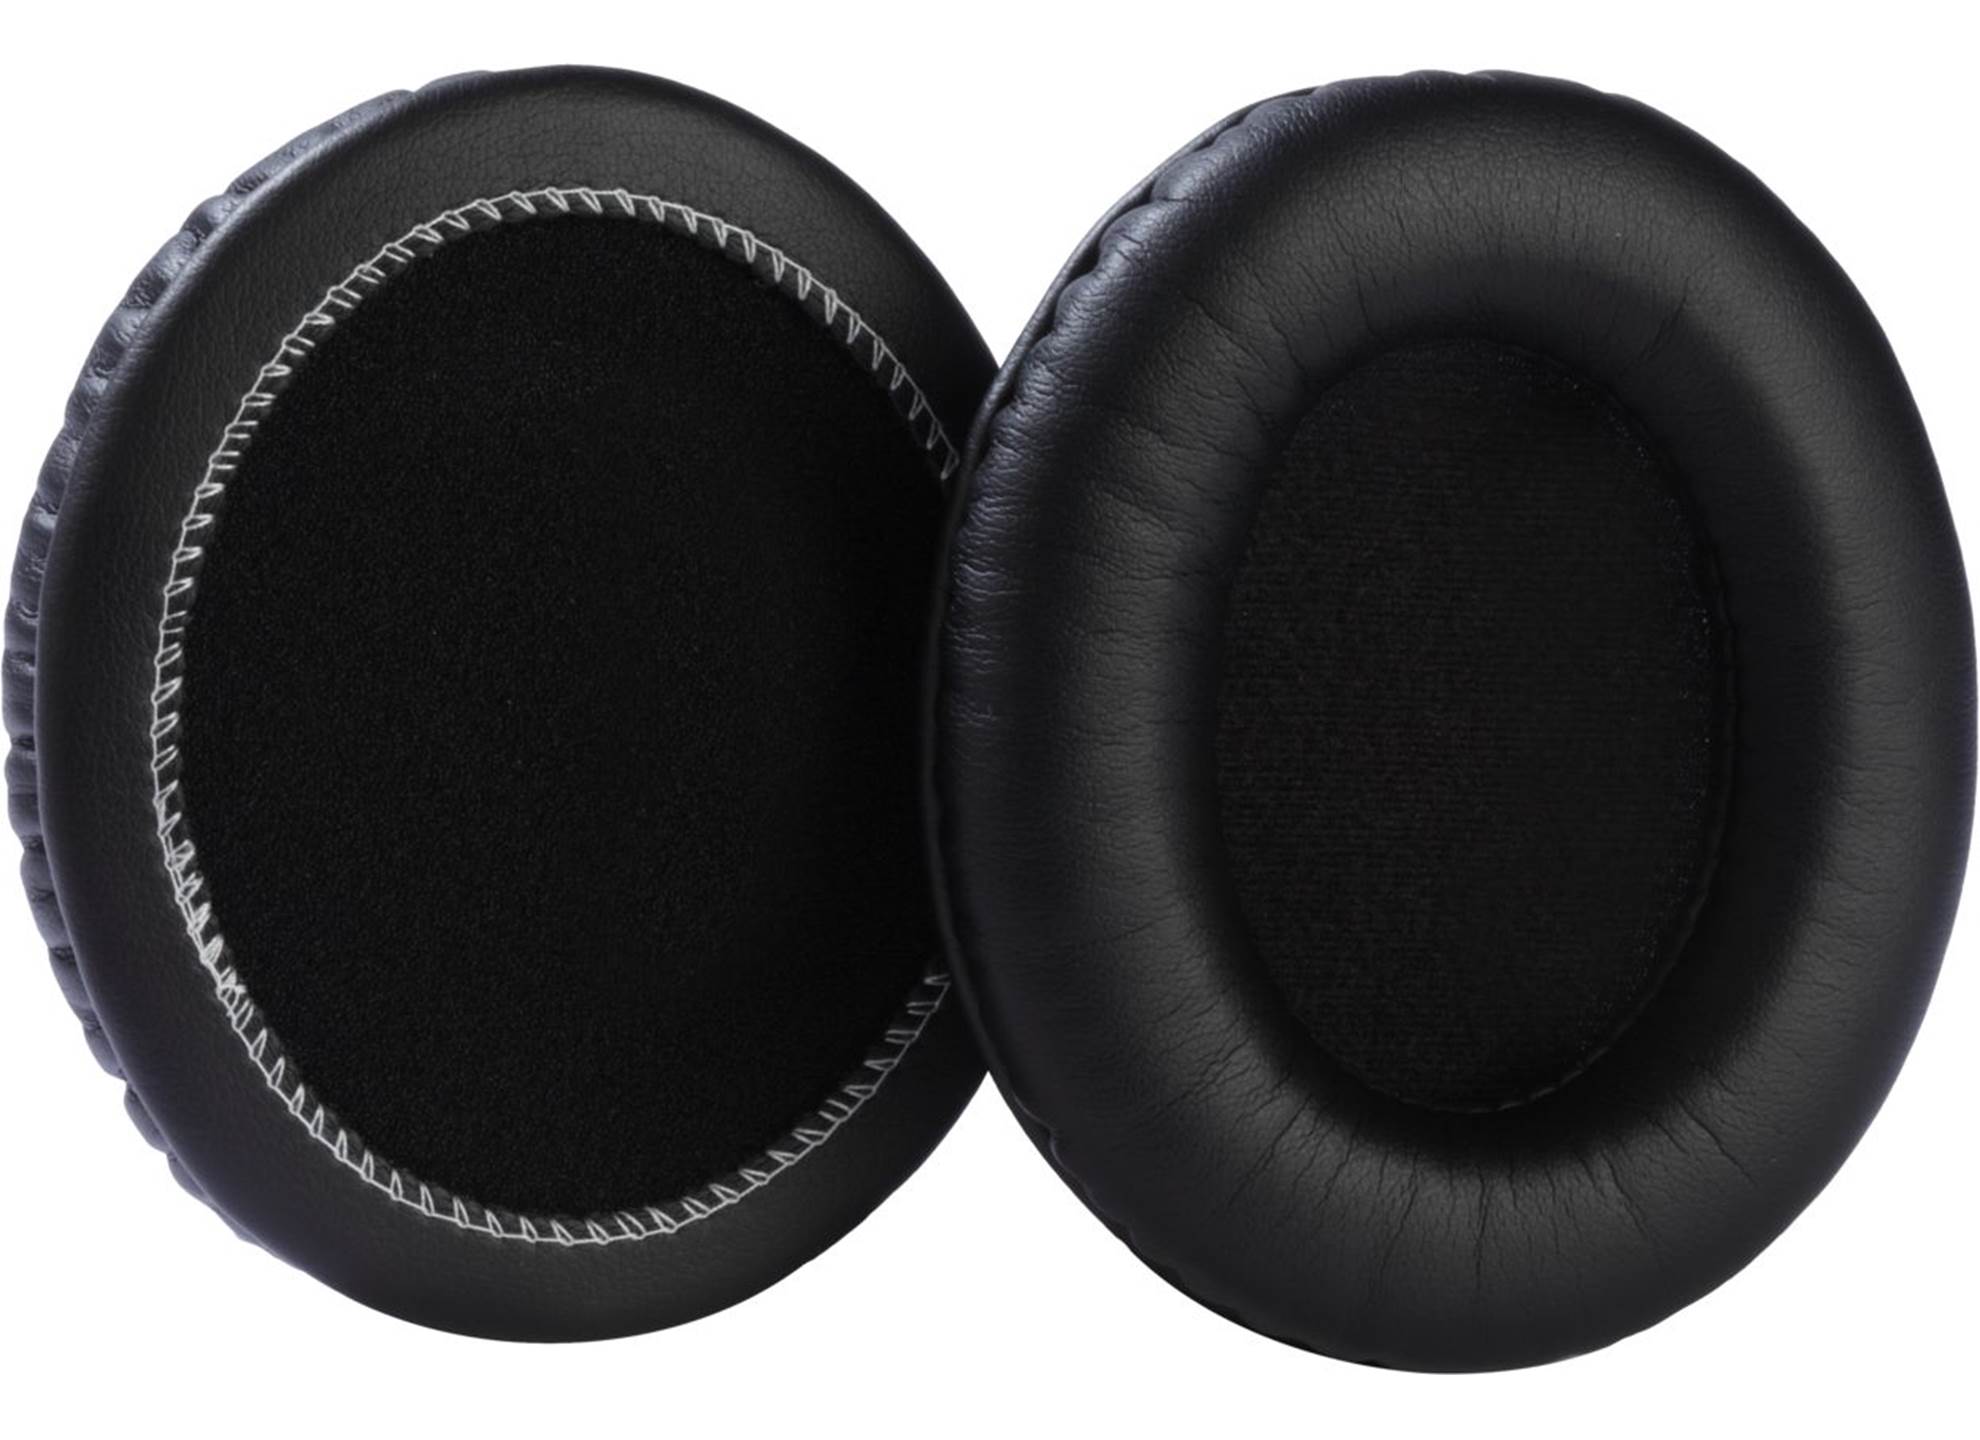 HPAEC840 Replacement Ear Cushions SRH840